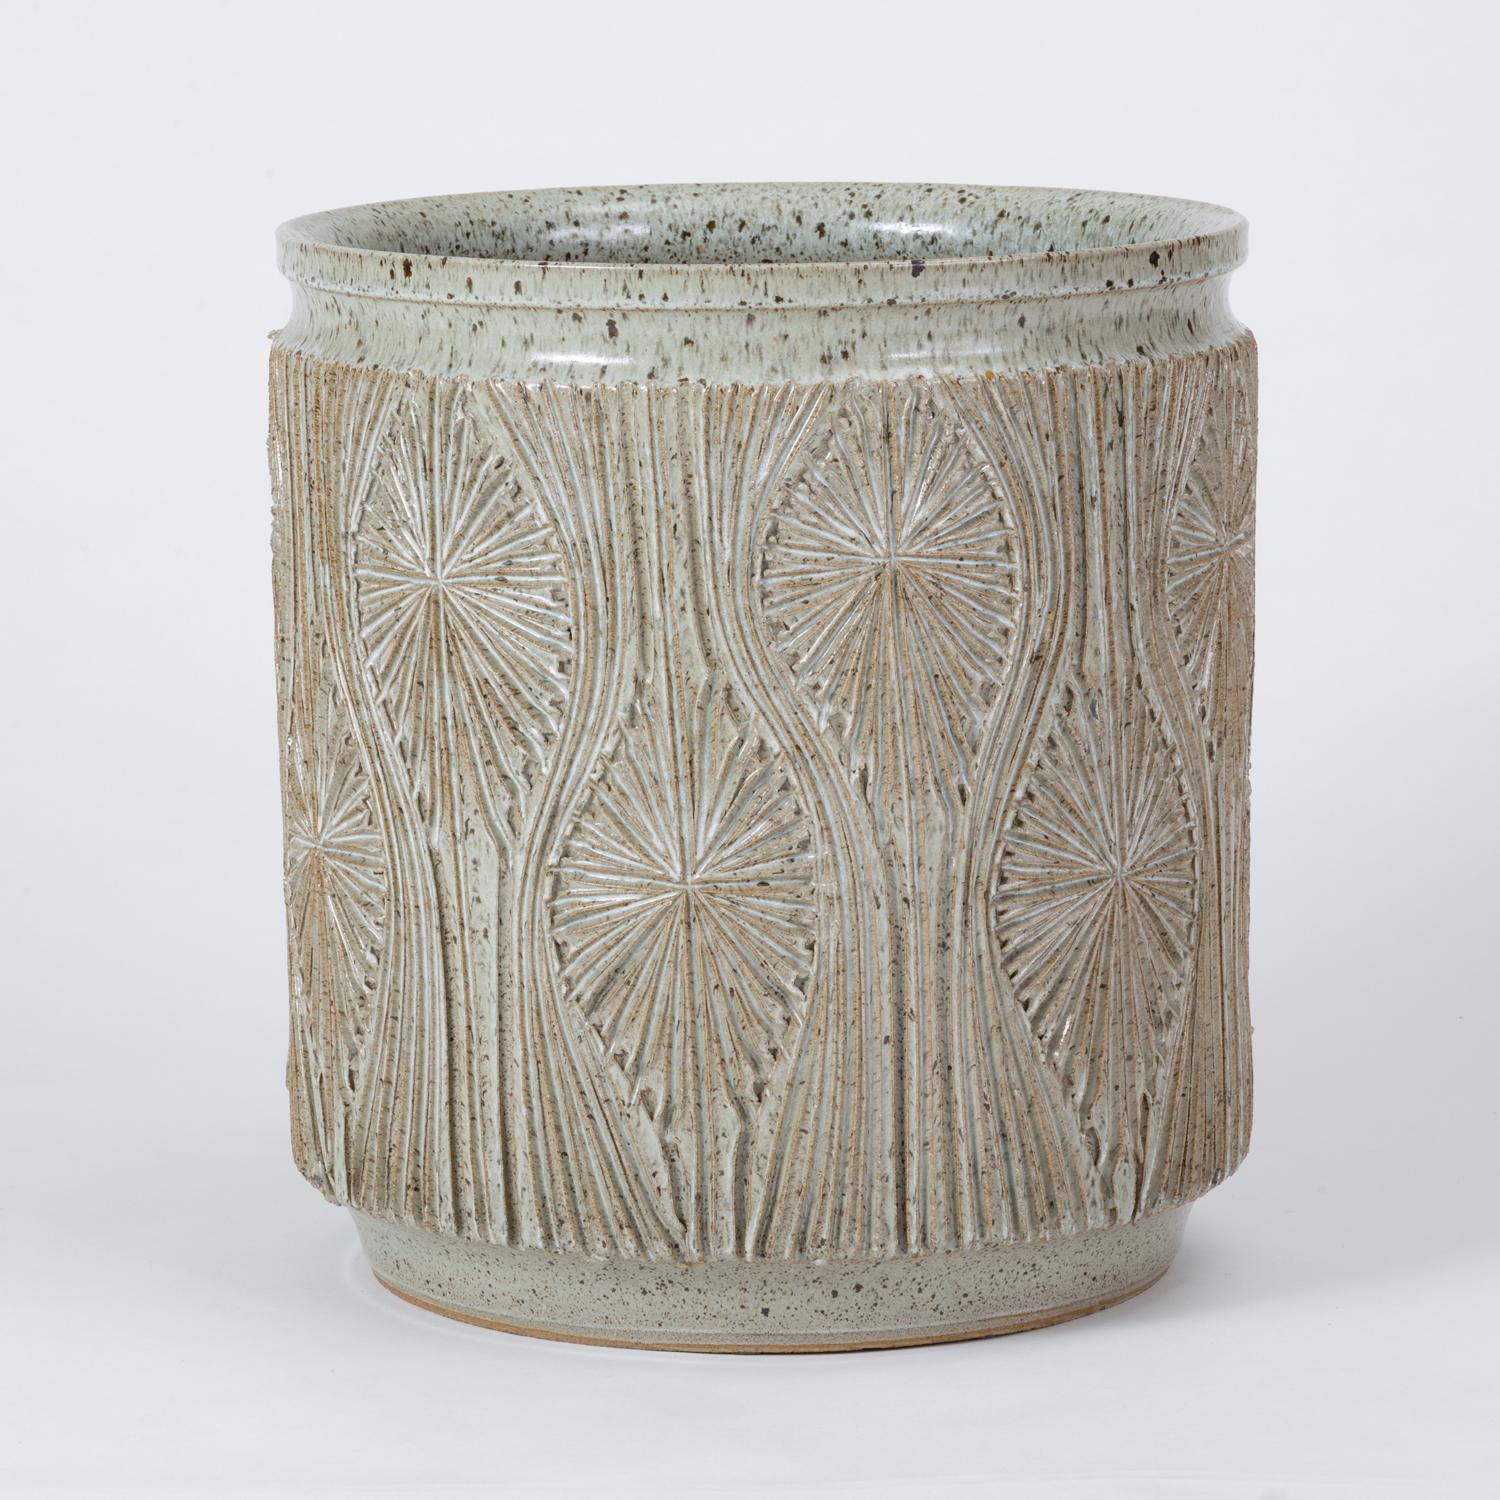 Single Gray-Glazed Earthgender Planter by David Cressey and Robert Maxwell (Steingut)